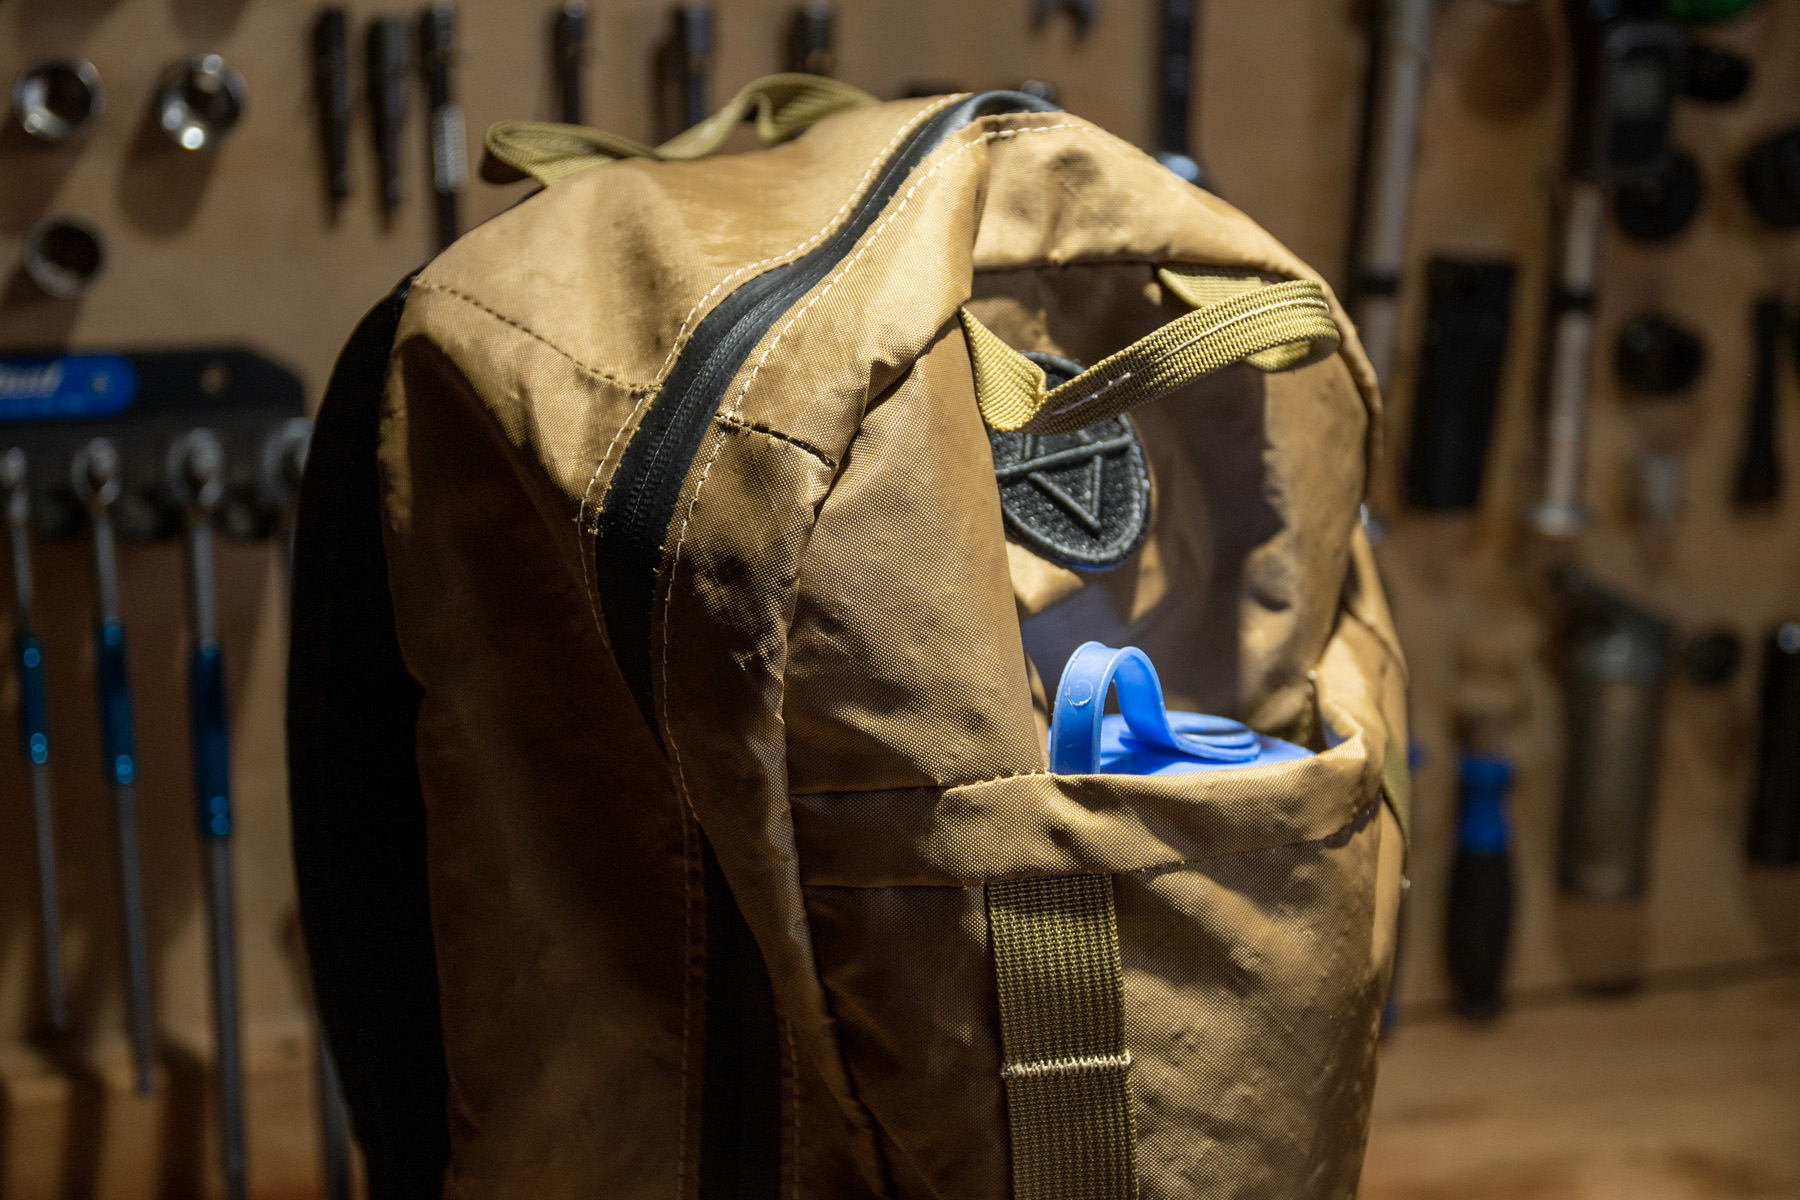 David Golay reviews the North St. Vancouver Daypack for BLISTER.